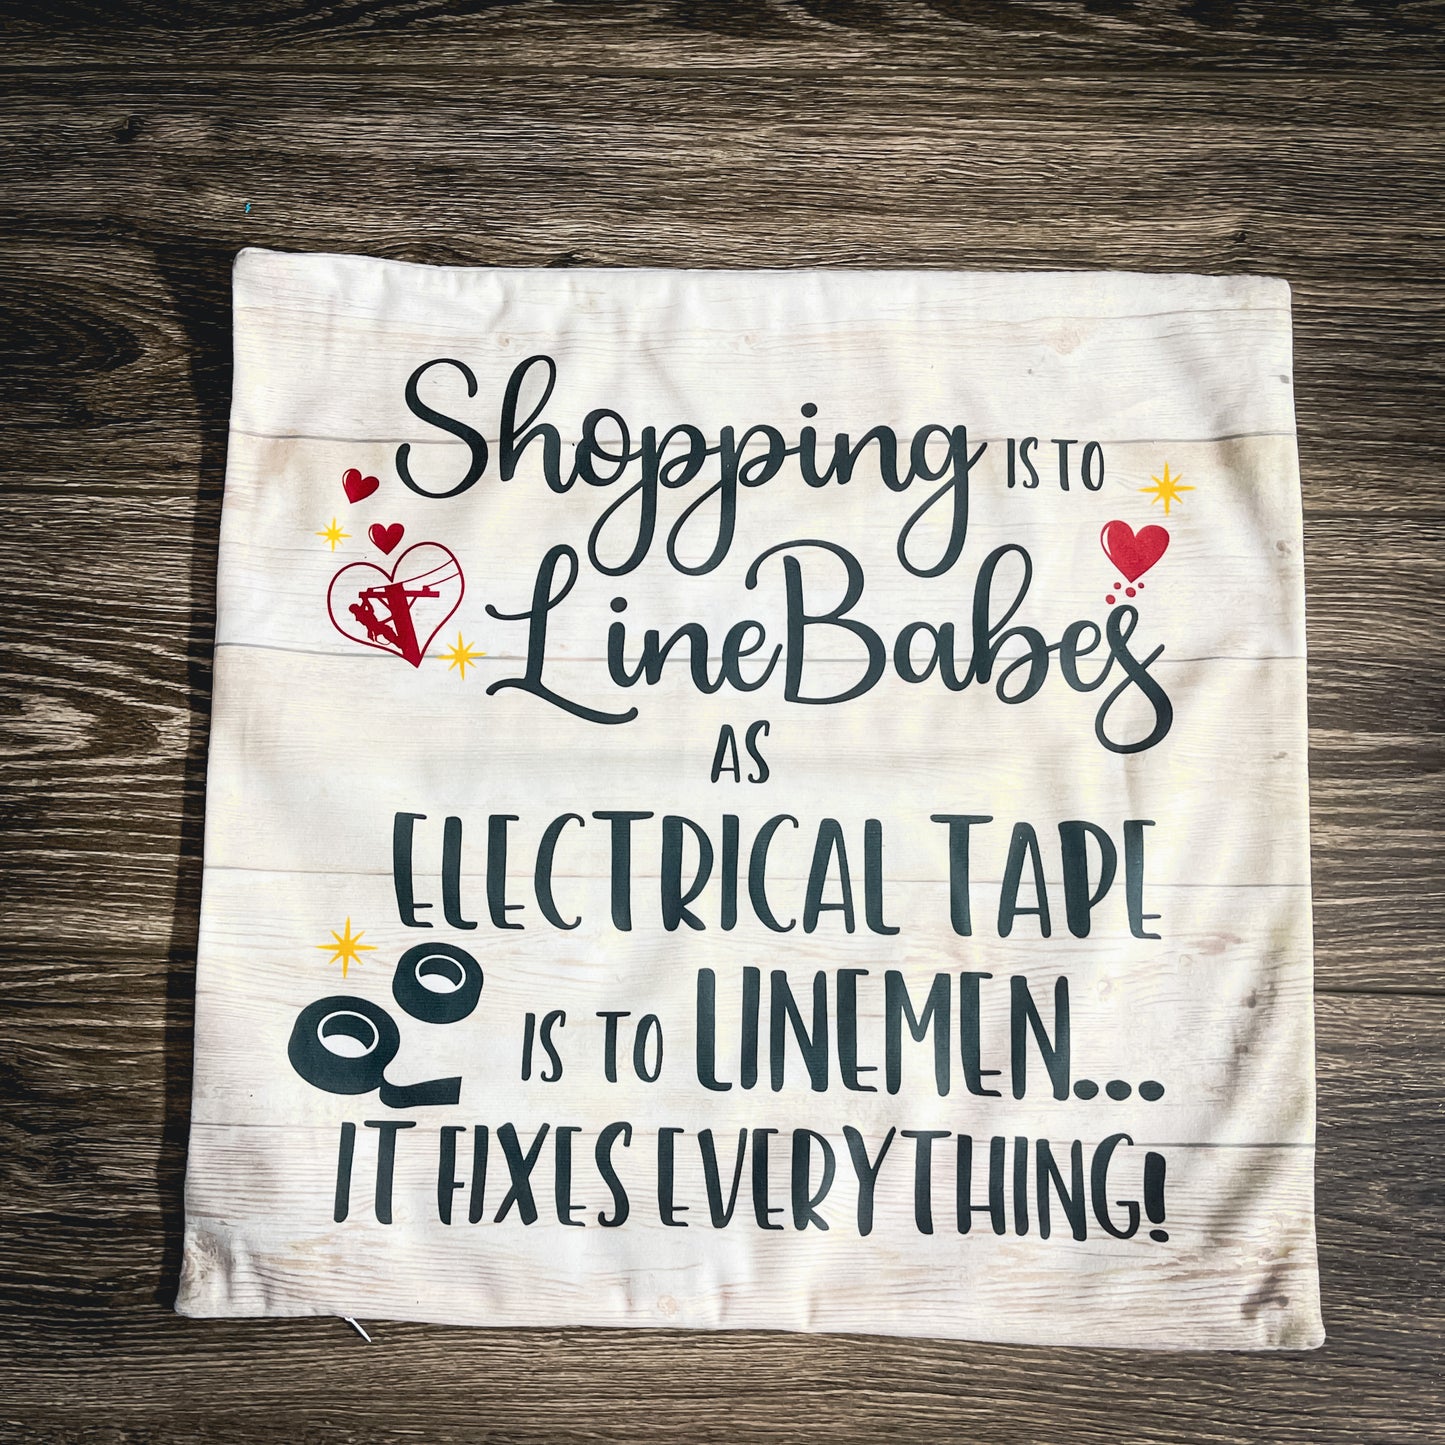 LineBabe Throw Pillow Cover